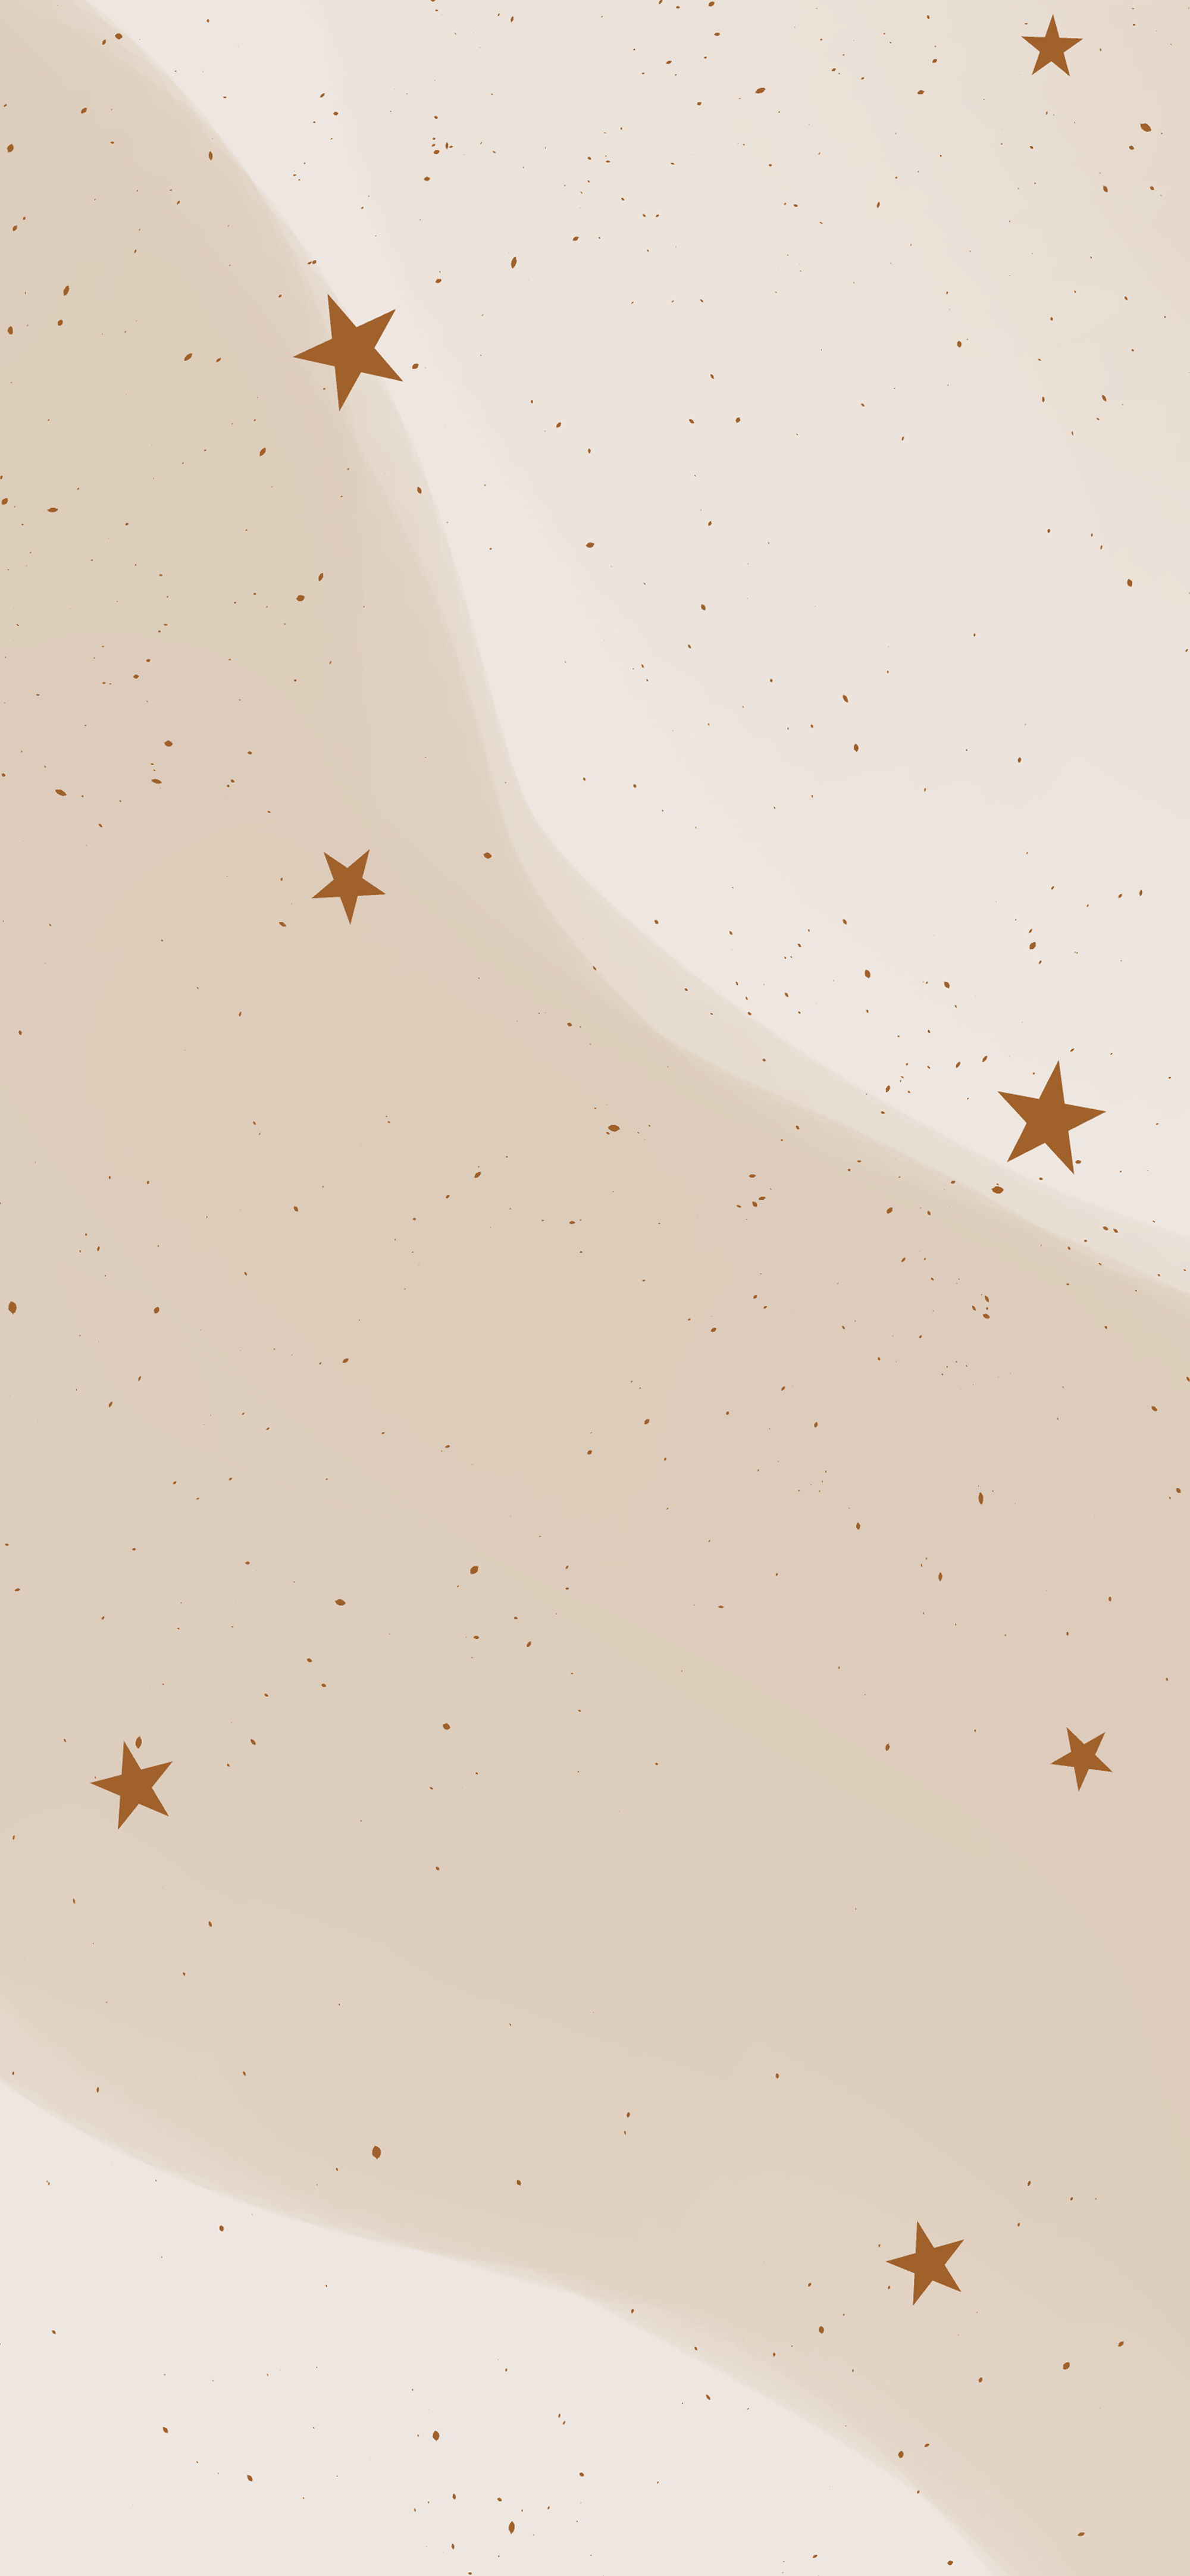 A cream background with gold stars - Stars, June